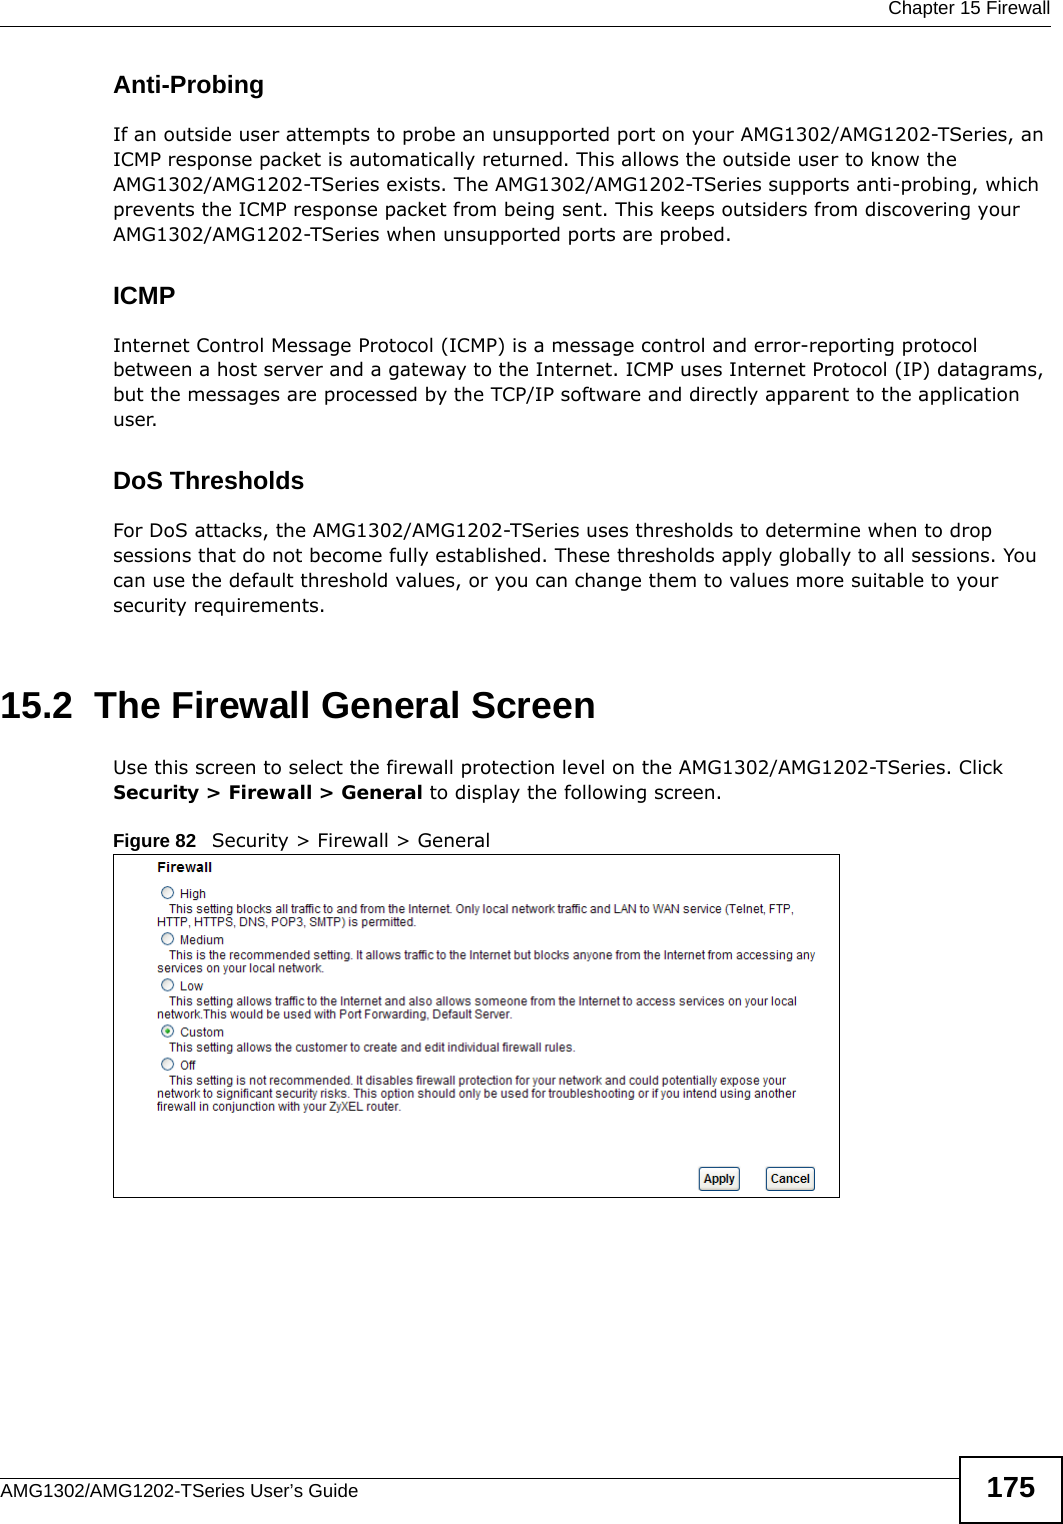  Chapter 15 FirewallAMG1302/AMG1202-TSeries User’s Guide 175Anti-ProbingIf an outside user attempts to probe an unsupported port on your AMG1302/AMG1202-TSeries, an ICMP response packet is automatically returned. This allows the outside user to know the AMG1302/AMG1202-TSeries exists. The AMG1302/AMG1202-TSeries supports anti-probing, which prevents the ICMP response packet from being sent. This keeps outsiders from discovering your AMG1302/AMG1202-TSeries when unsupported ports are probed. ICMPInternet Control Message Protocol (ICMP) is a message control and error-reporting protocol between a host server and a gateway to the Internet. ICMP uses Internet Protocol (IP) datagrams, but the messages are processed by the TCP/IP software and directly apparent to the application user. DoS ThresholdsFor DoS attacks, the AMG1302/AMG1202-TSeries uses thresholds to determine when to drop sessions that do not become fully established. These thresholds apply globally to all sessions. You can use the default threshold values, or you can change them to values more suitable to your security requirements.15.2  The Firewall General ScreenUse this screen to select the firewall protection level on the AMG1302/AMG1202-TSeries. Click Security &gt; Firewall &gt; General to display the following screen.Figure 82   Security &gt; Firewall &gt; General